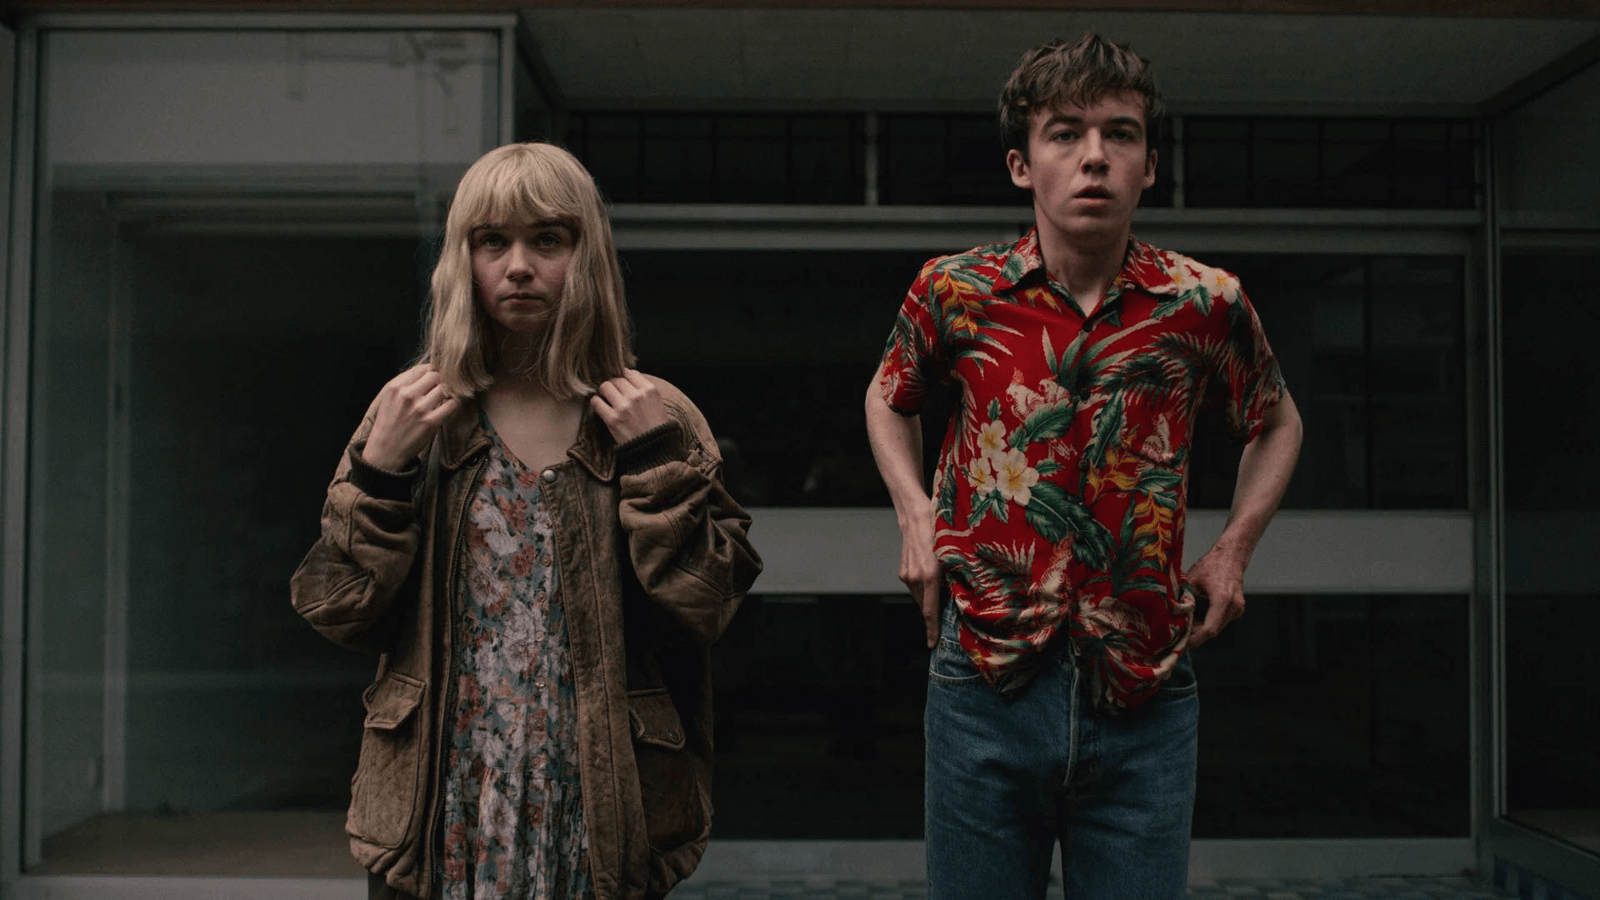 Review: THE END OF THE F***ING WORLD